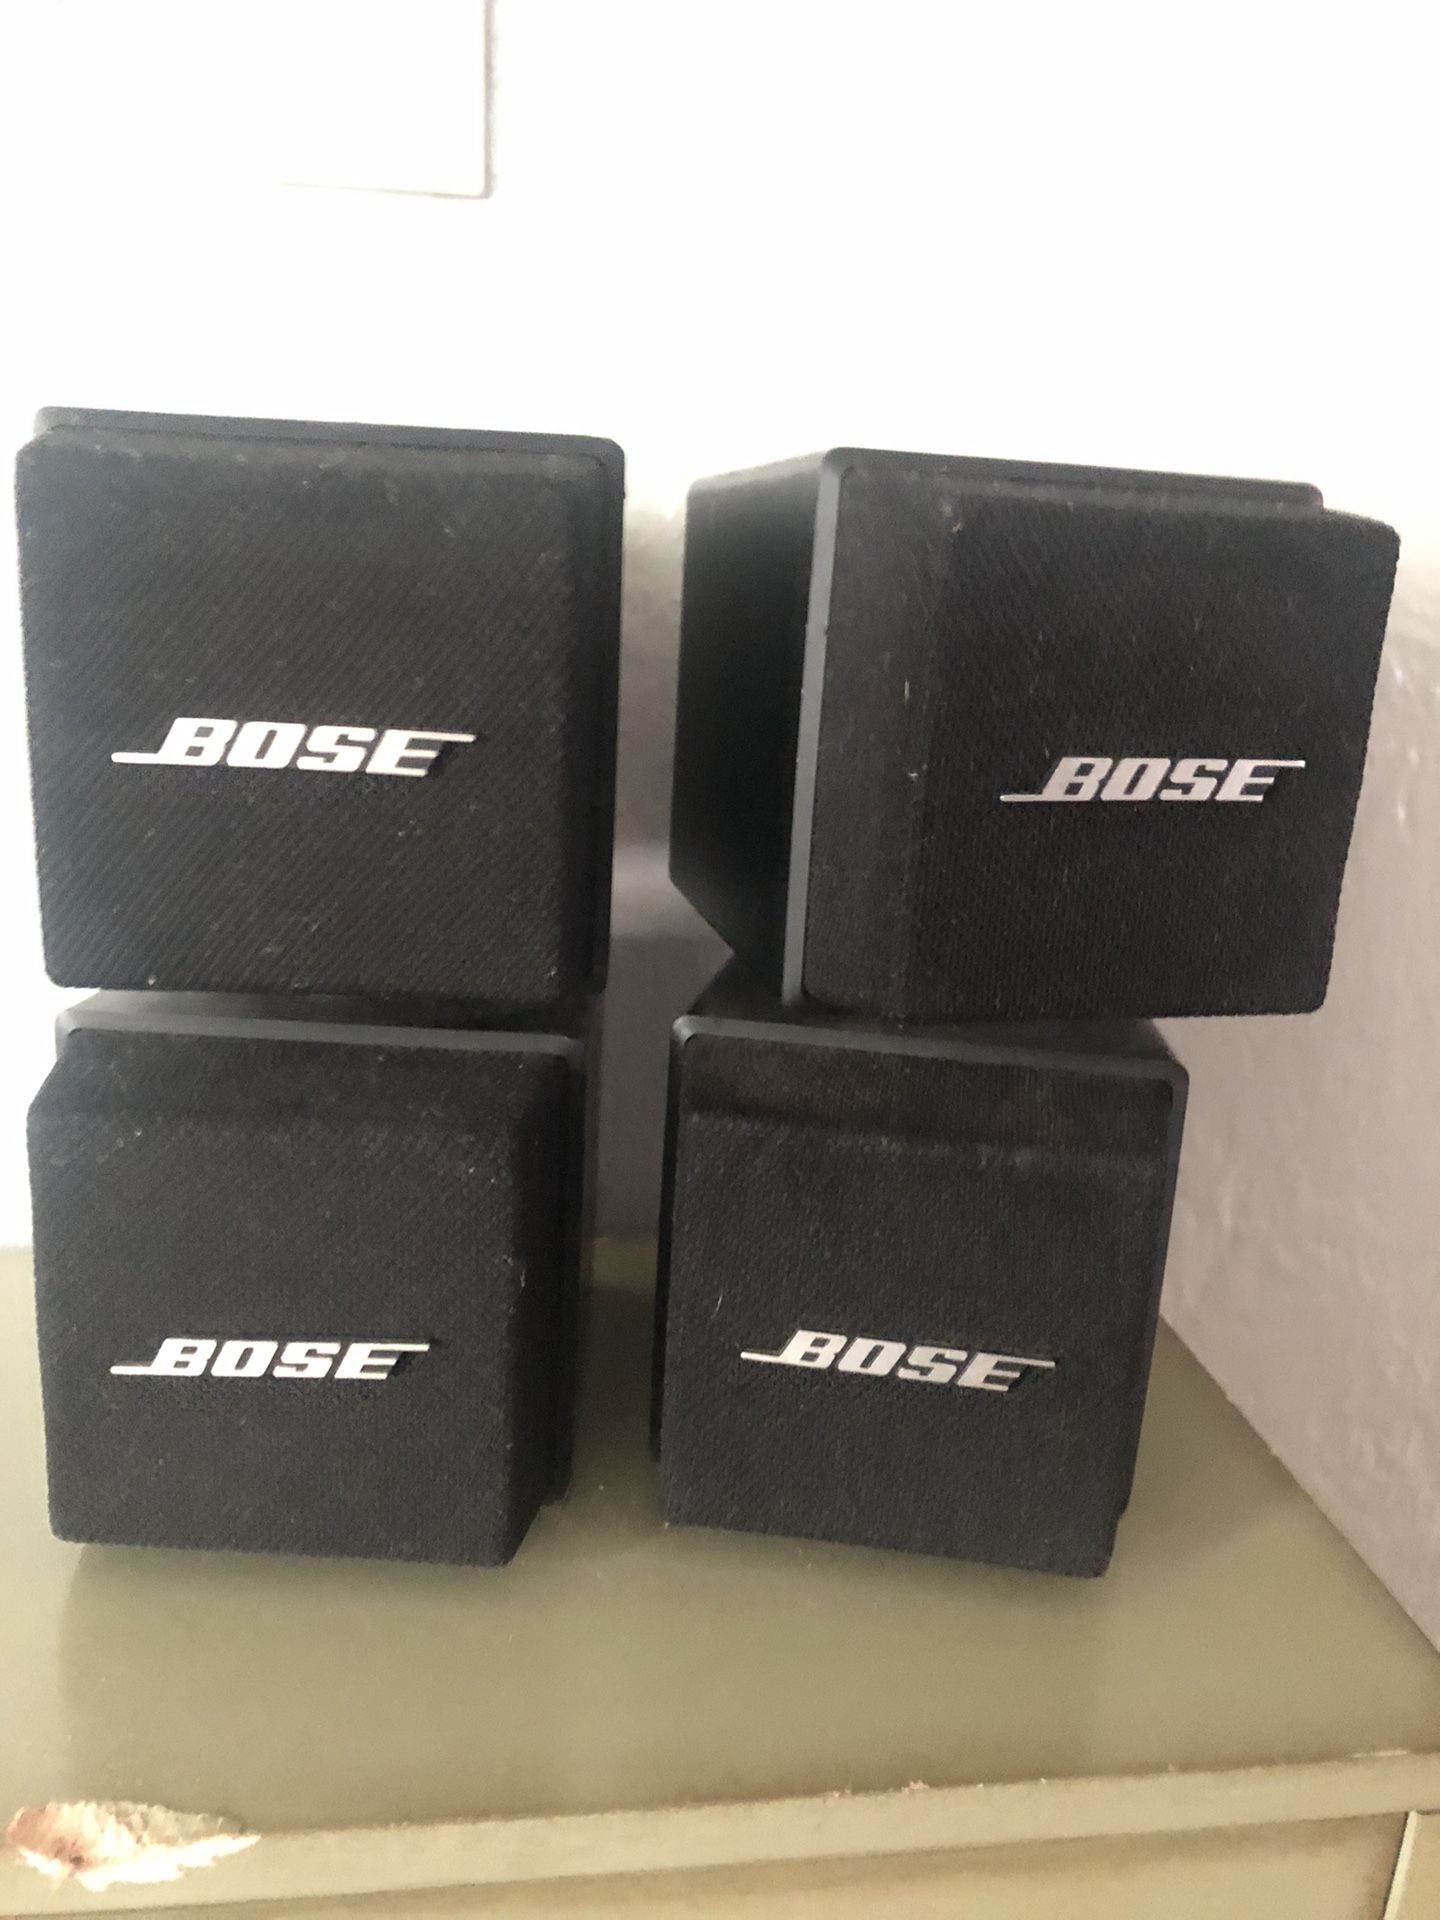 Set of 2 Bose AM 5 Double Cube Speakers Acoustimass 